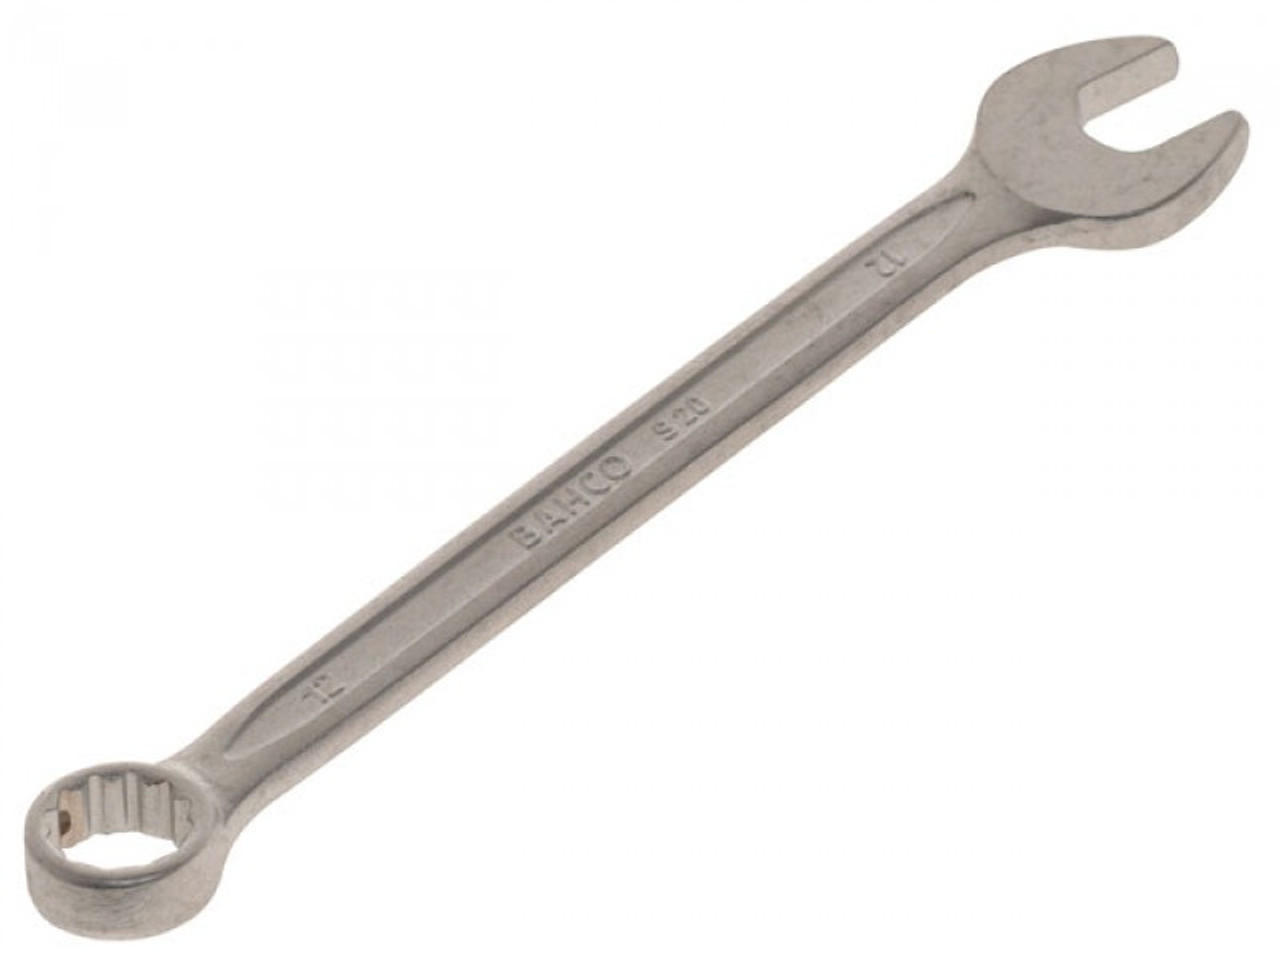 IMPA 616143 WRENCH OPEN & 12-POINT BOX METRIC 20mm  TRANSTIME